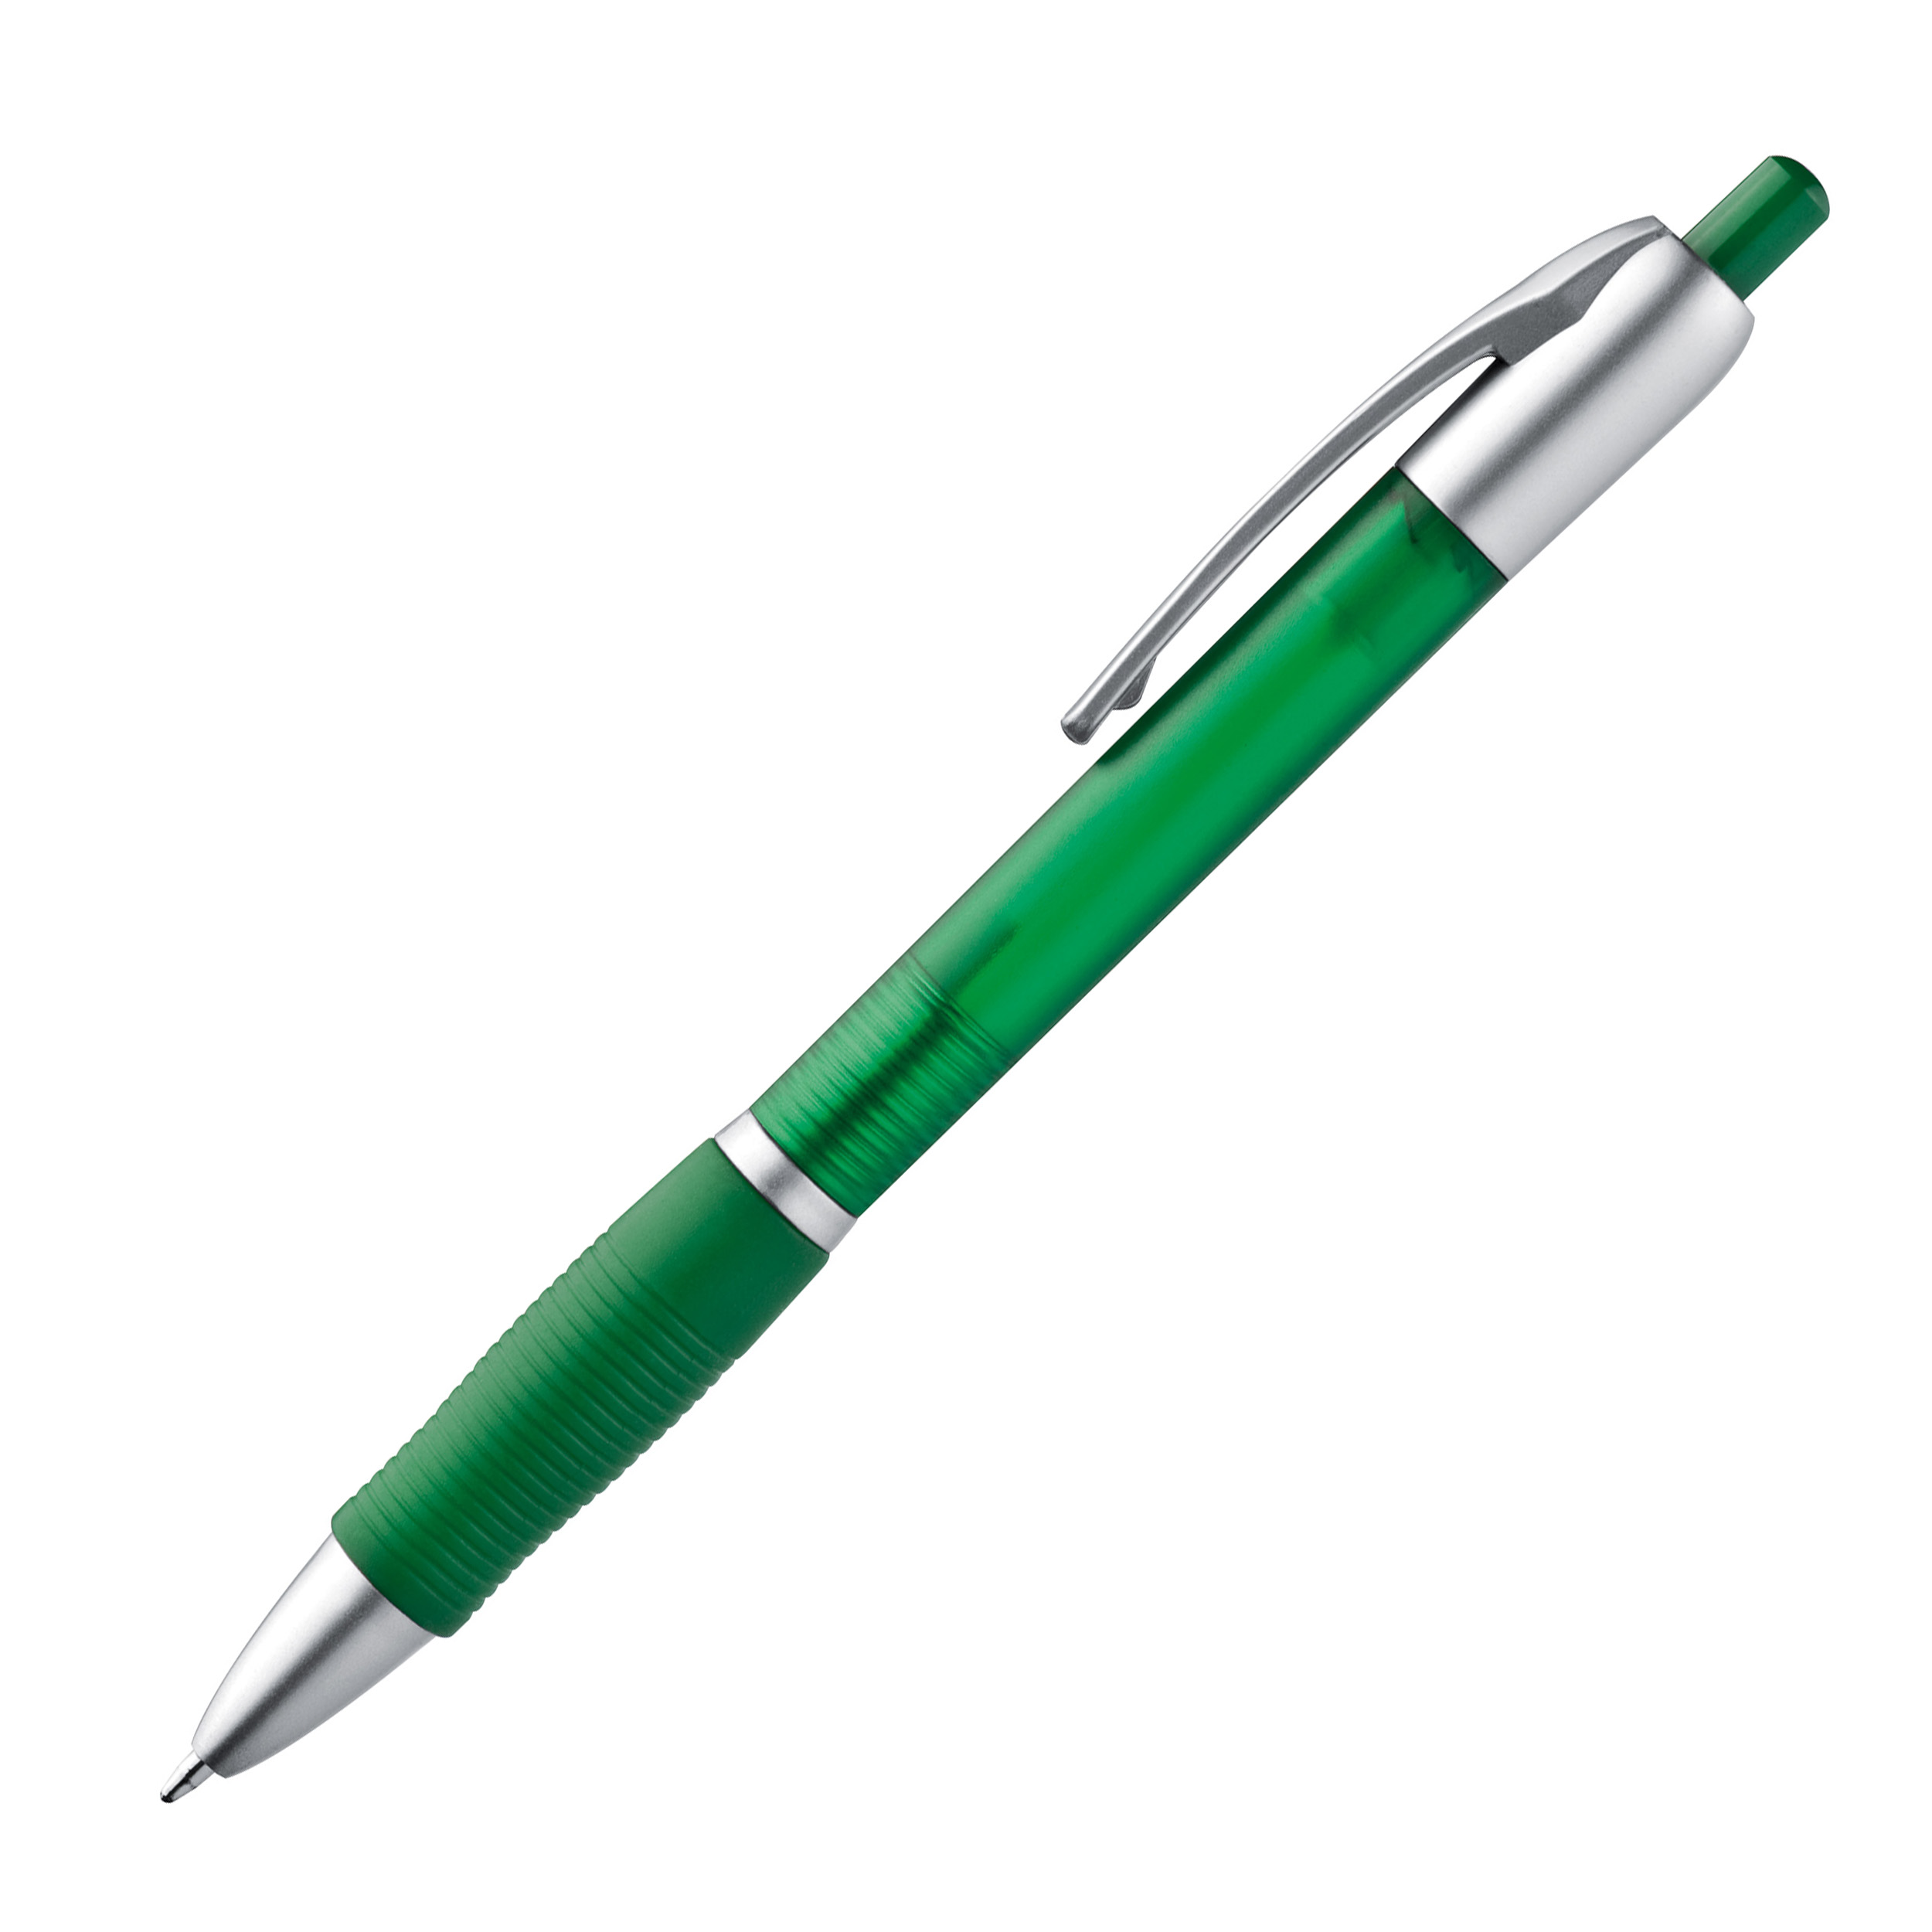 Frosted plastic ball pen with grooved rubber grip zone